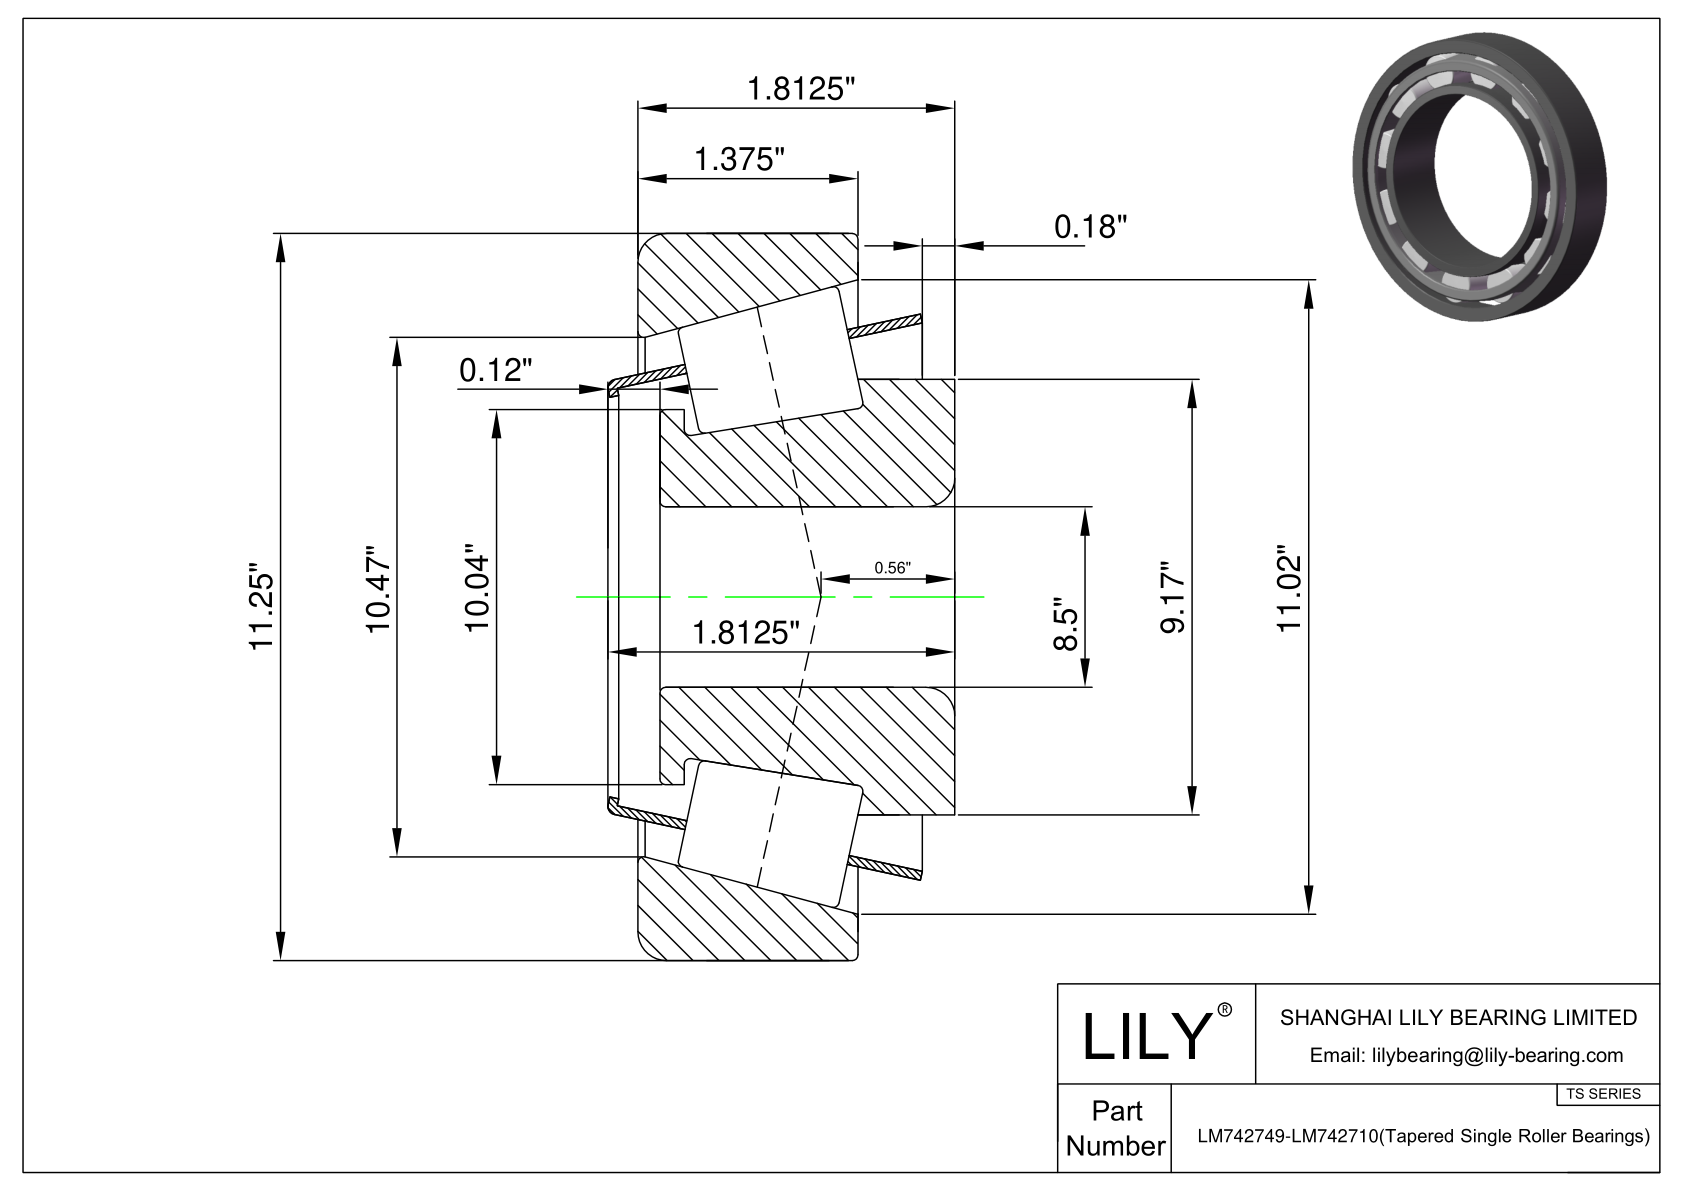 LM742749-LM742710 TS (Tapered Single Roller Bearings) (Imperial) cad drawing